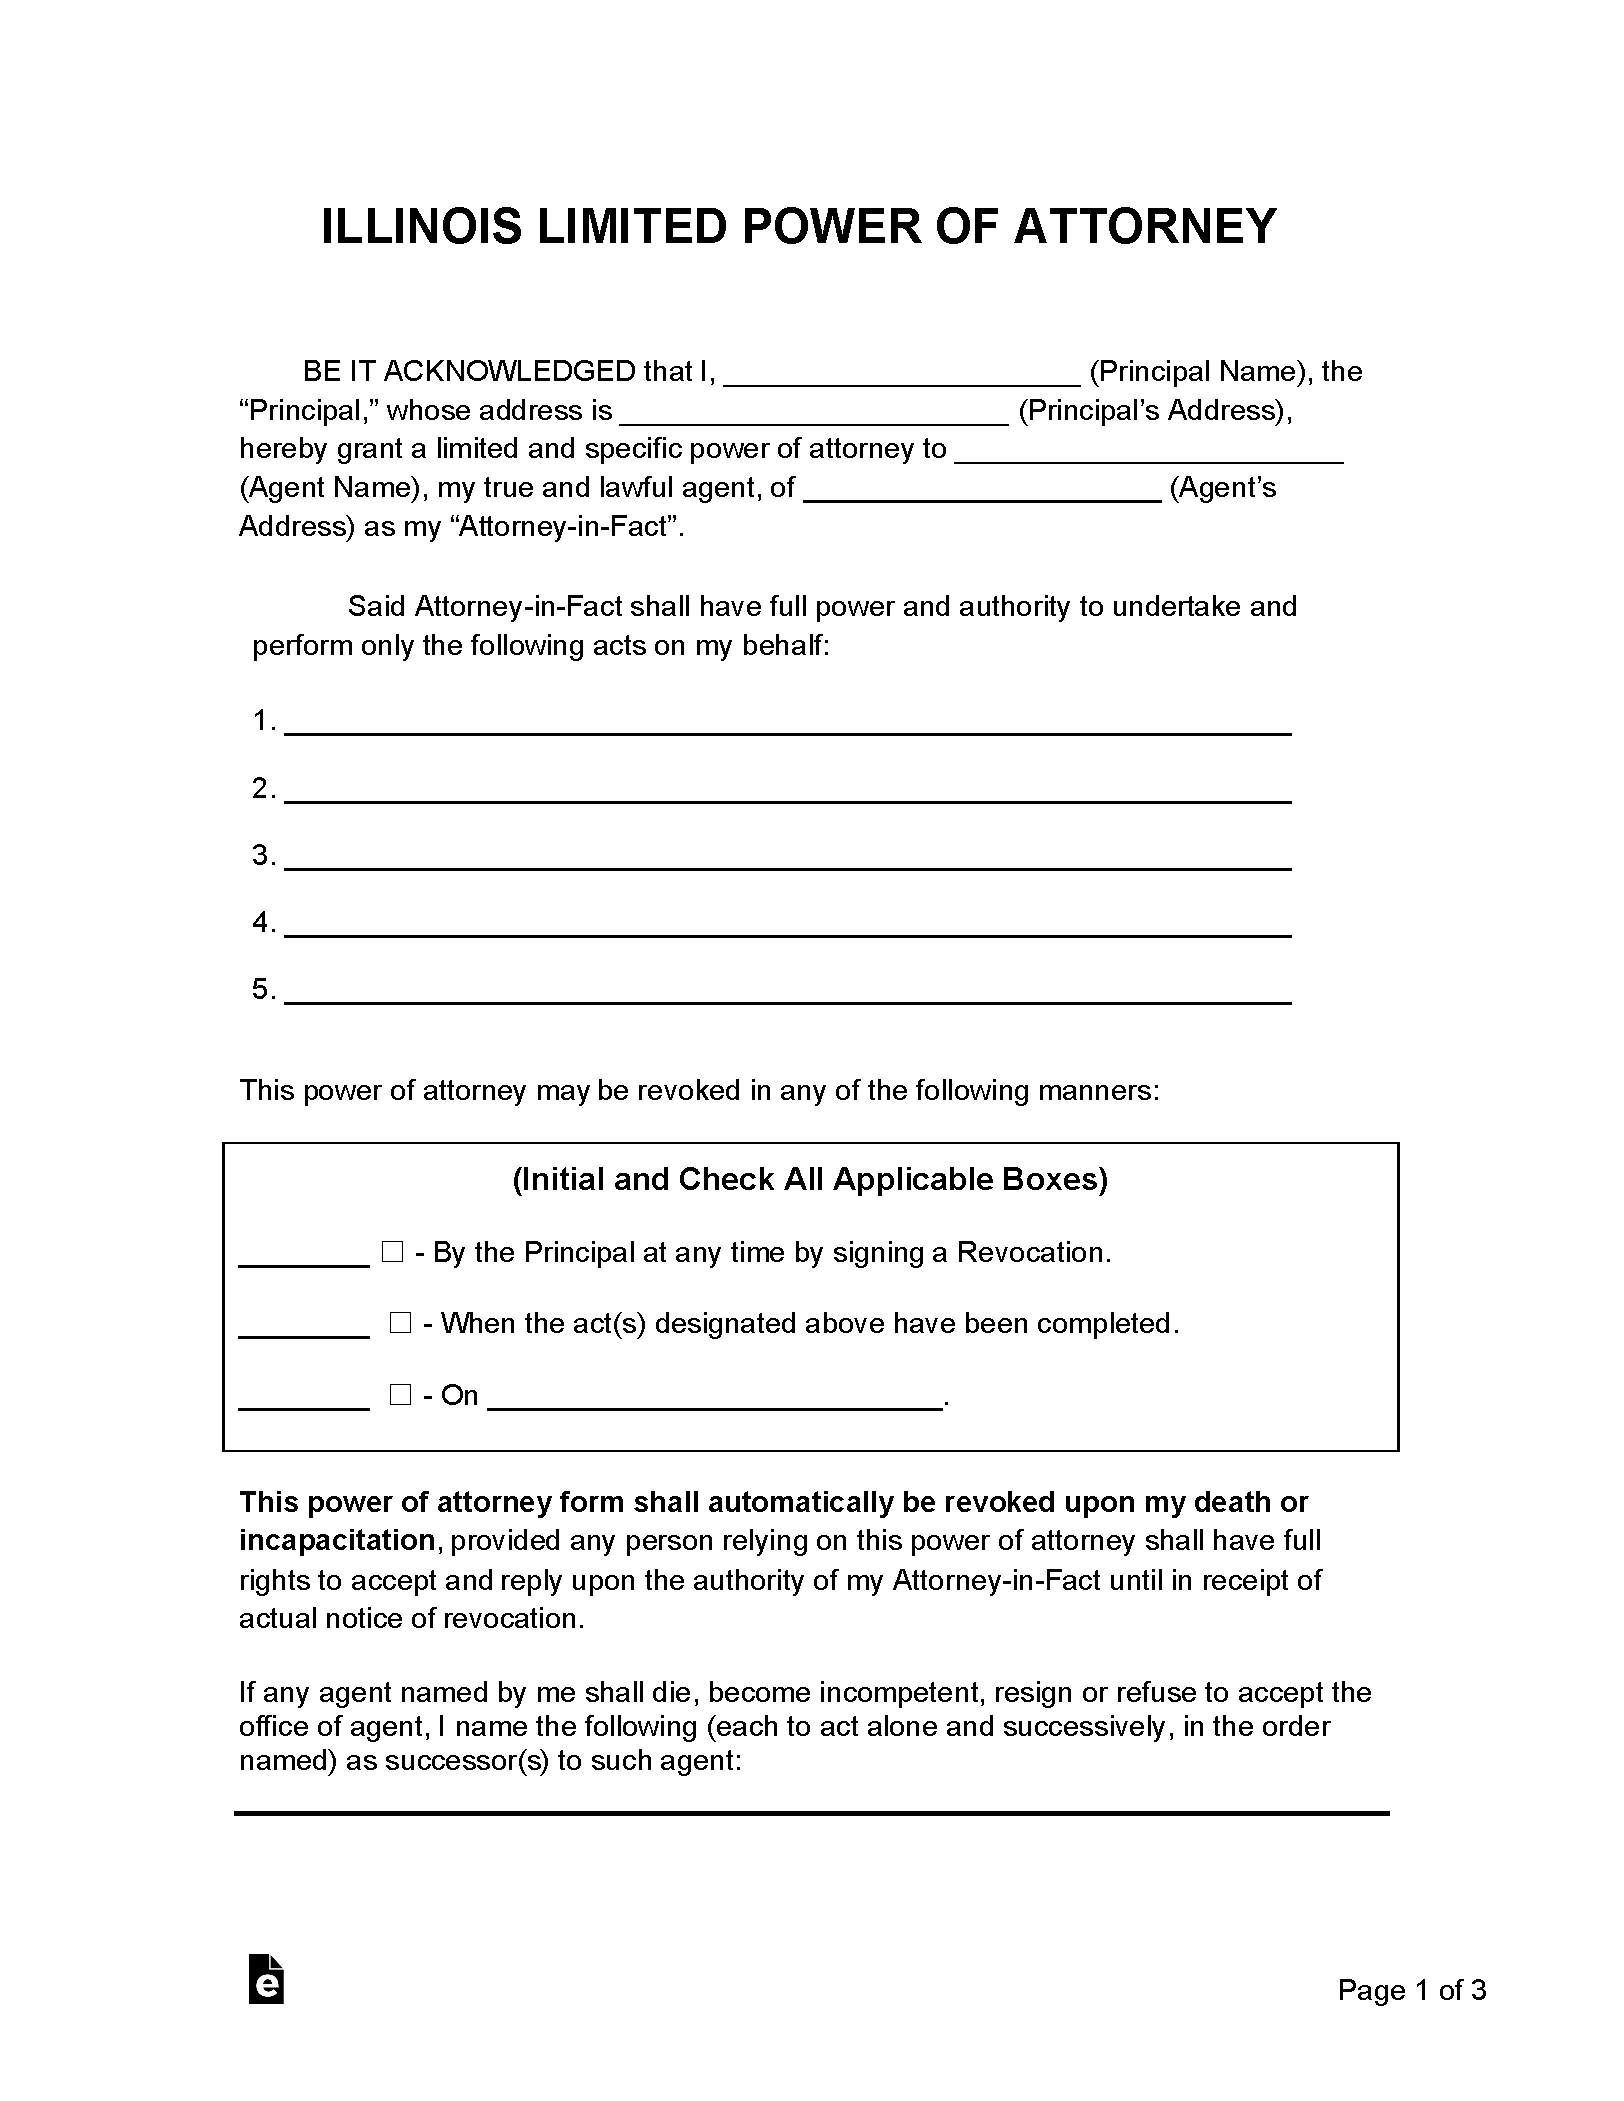 Illinois Limited Power of Attorney Form